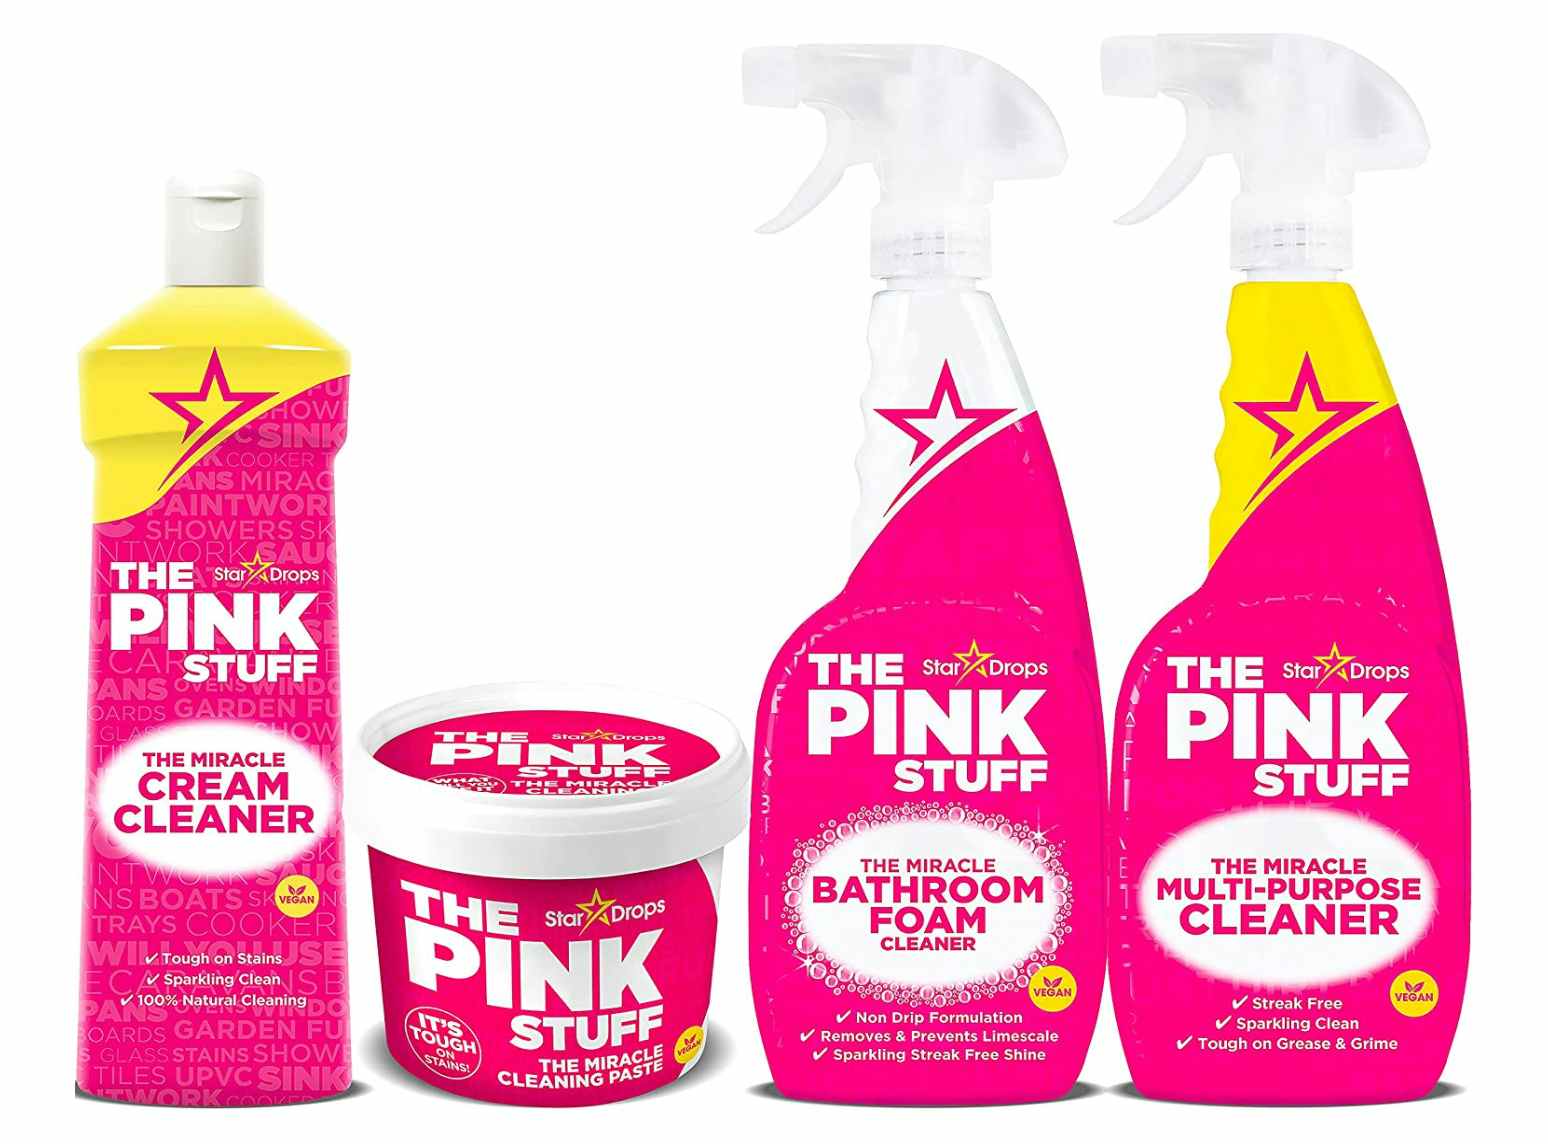 Four pink cleaning containers and bottles on a whitebackground